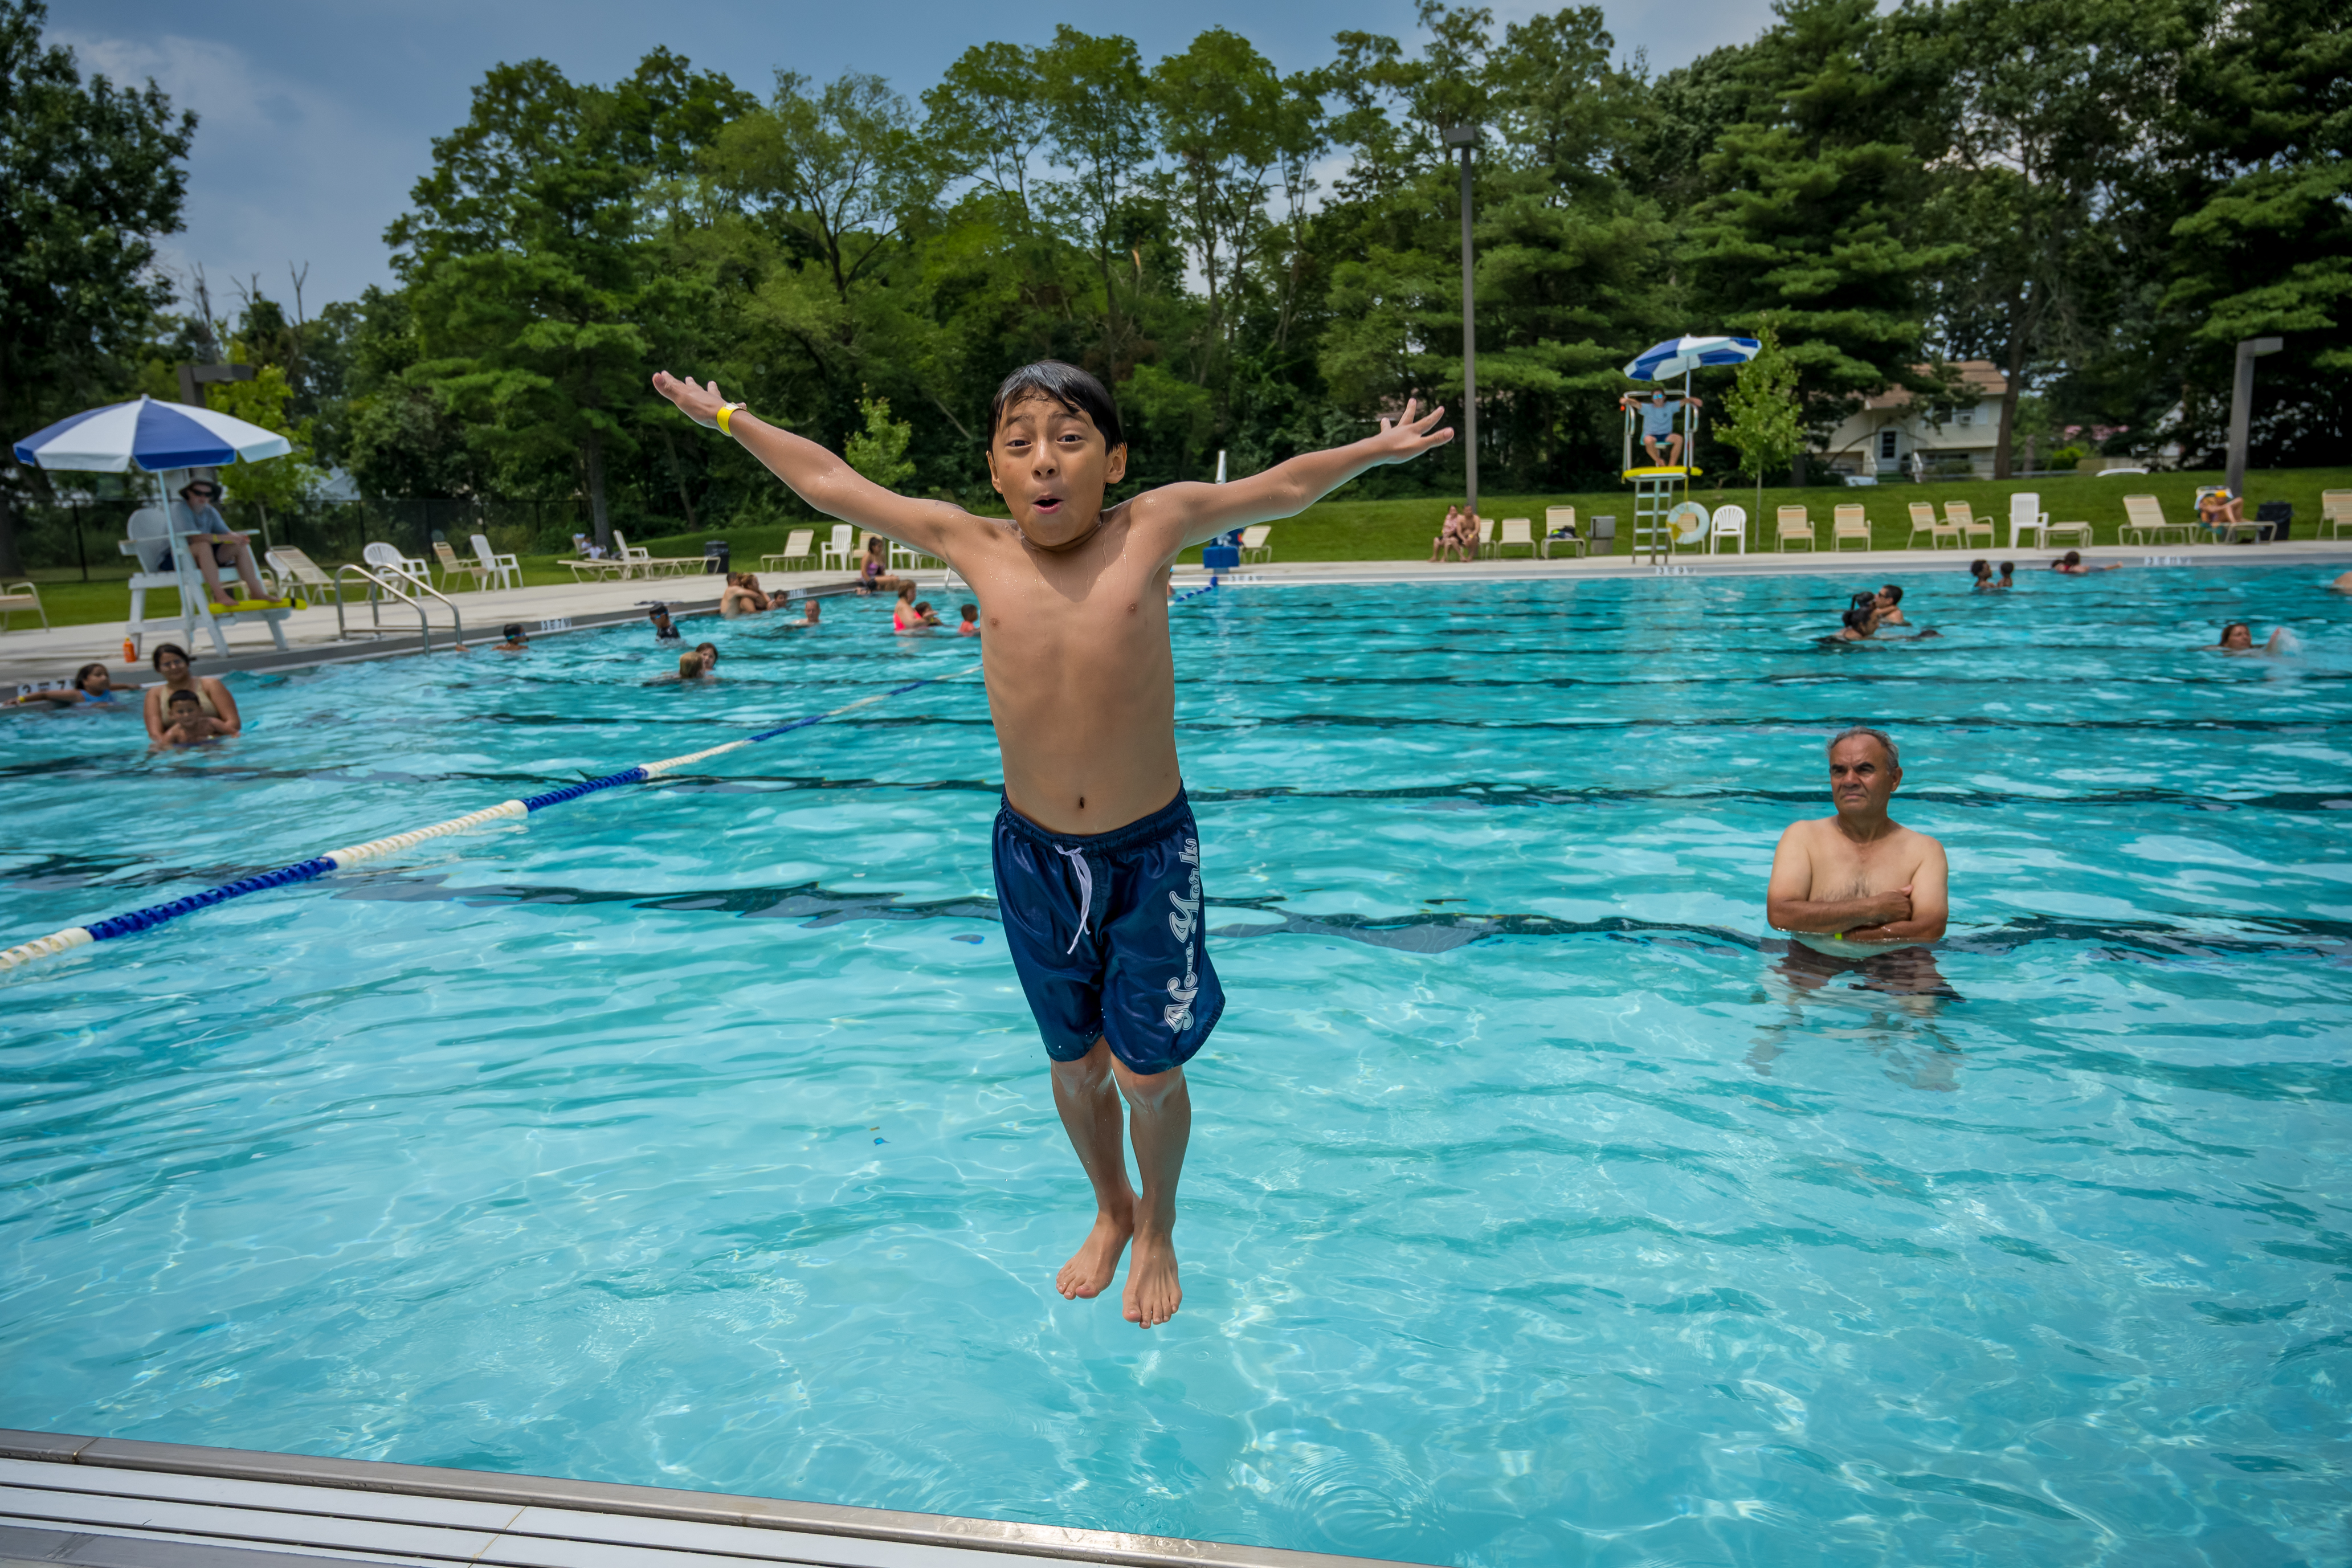 Cool young kid T-Poses backwards into the new waters of Roberto Clemente Pool!